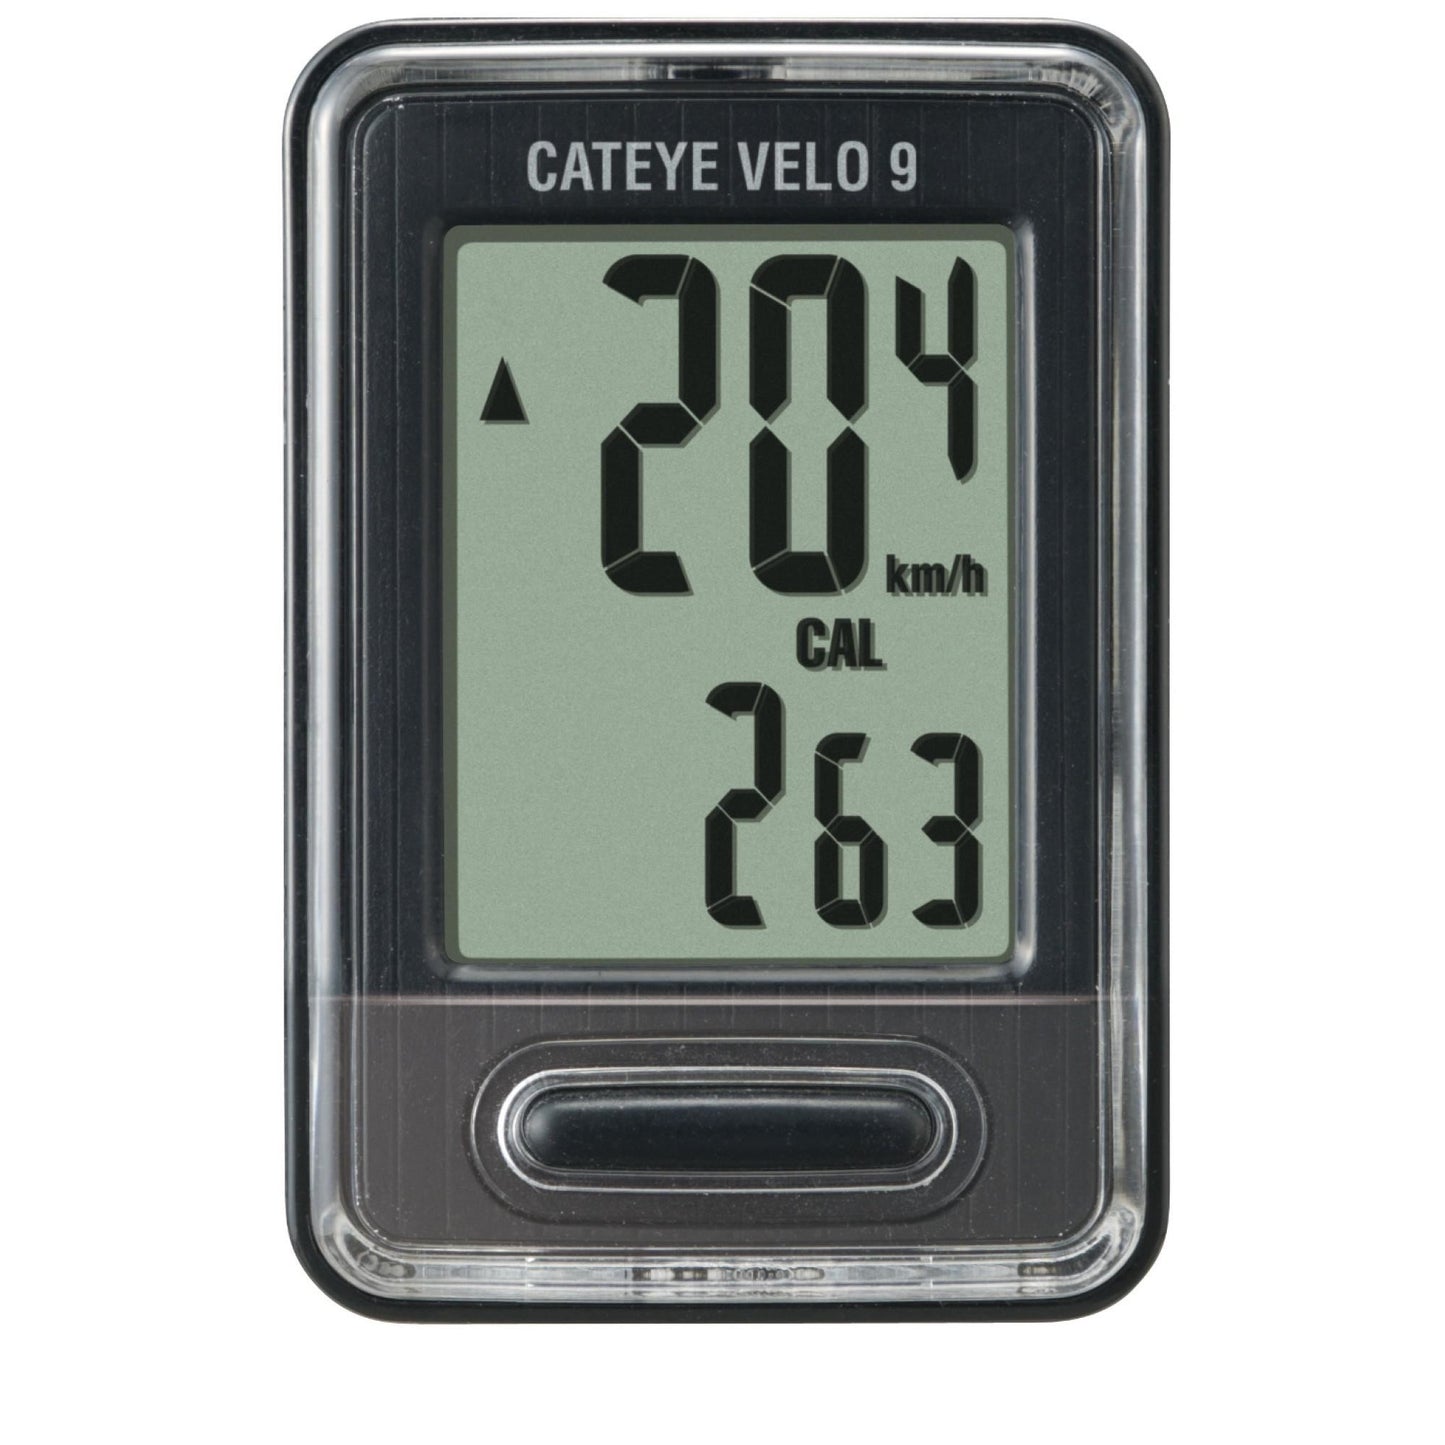 ORDINATEUR CYCLE CATEYE VELO 9 FILAIRE